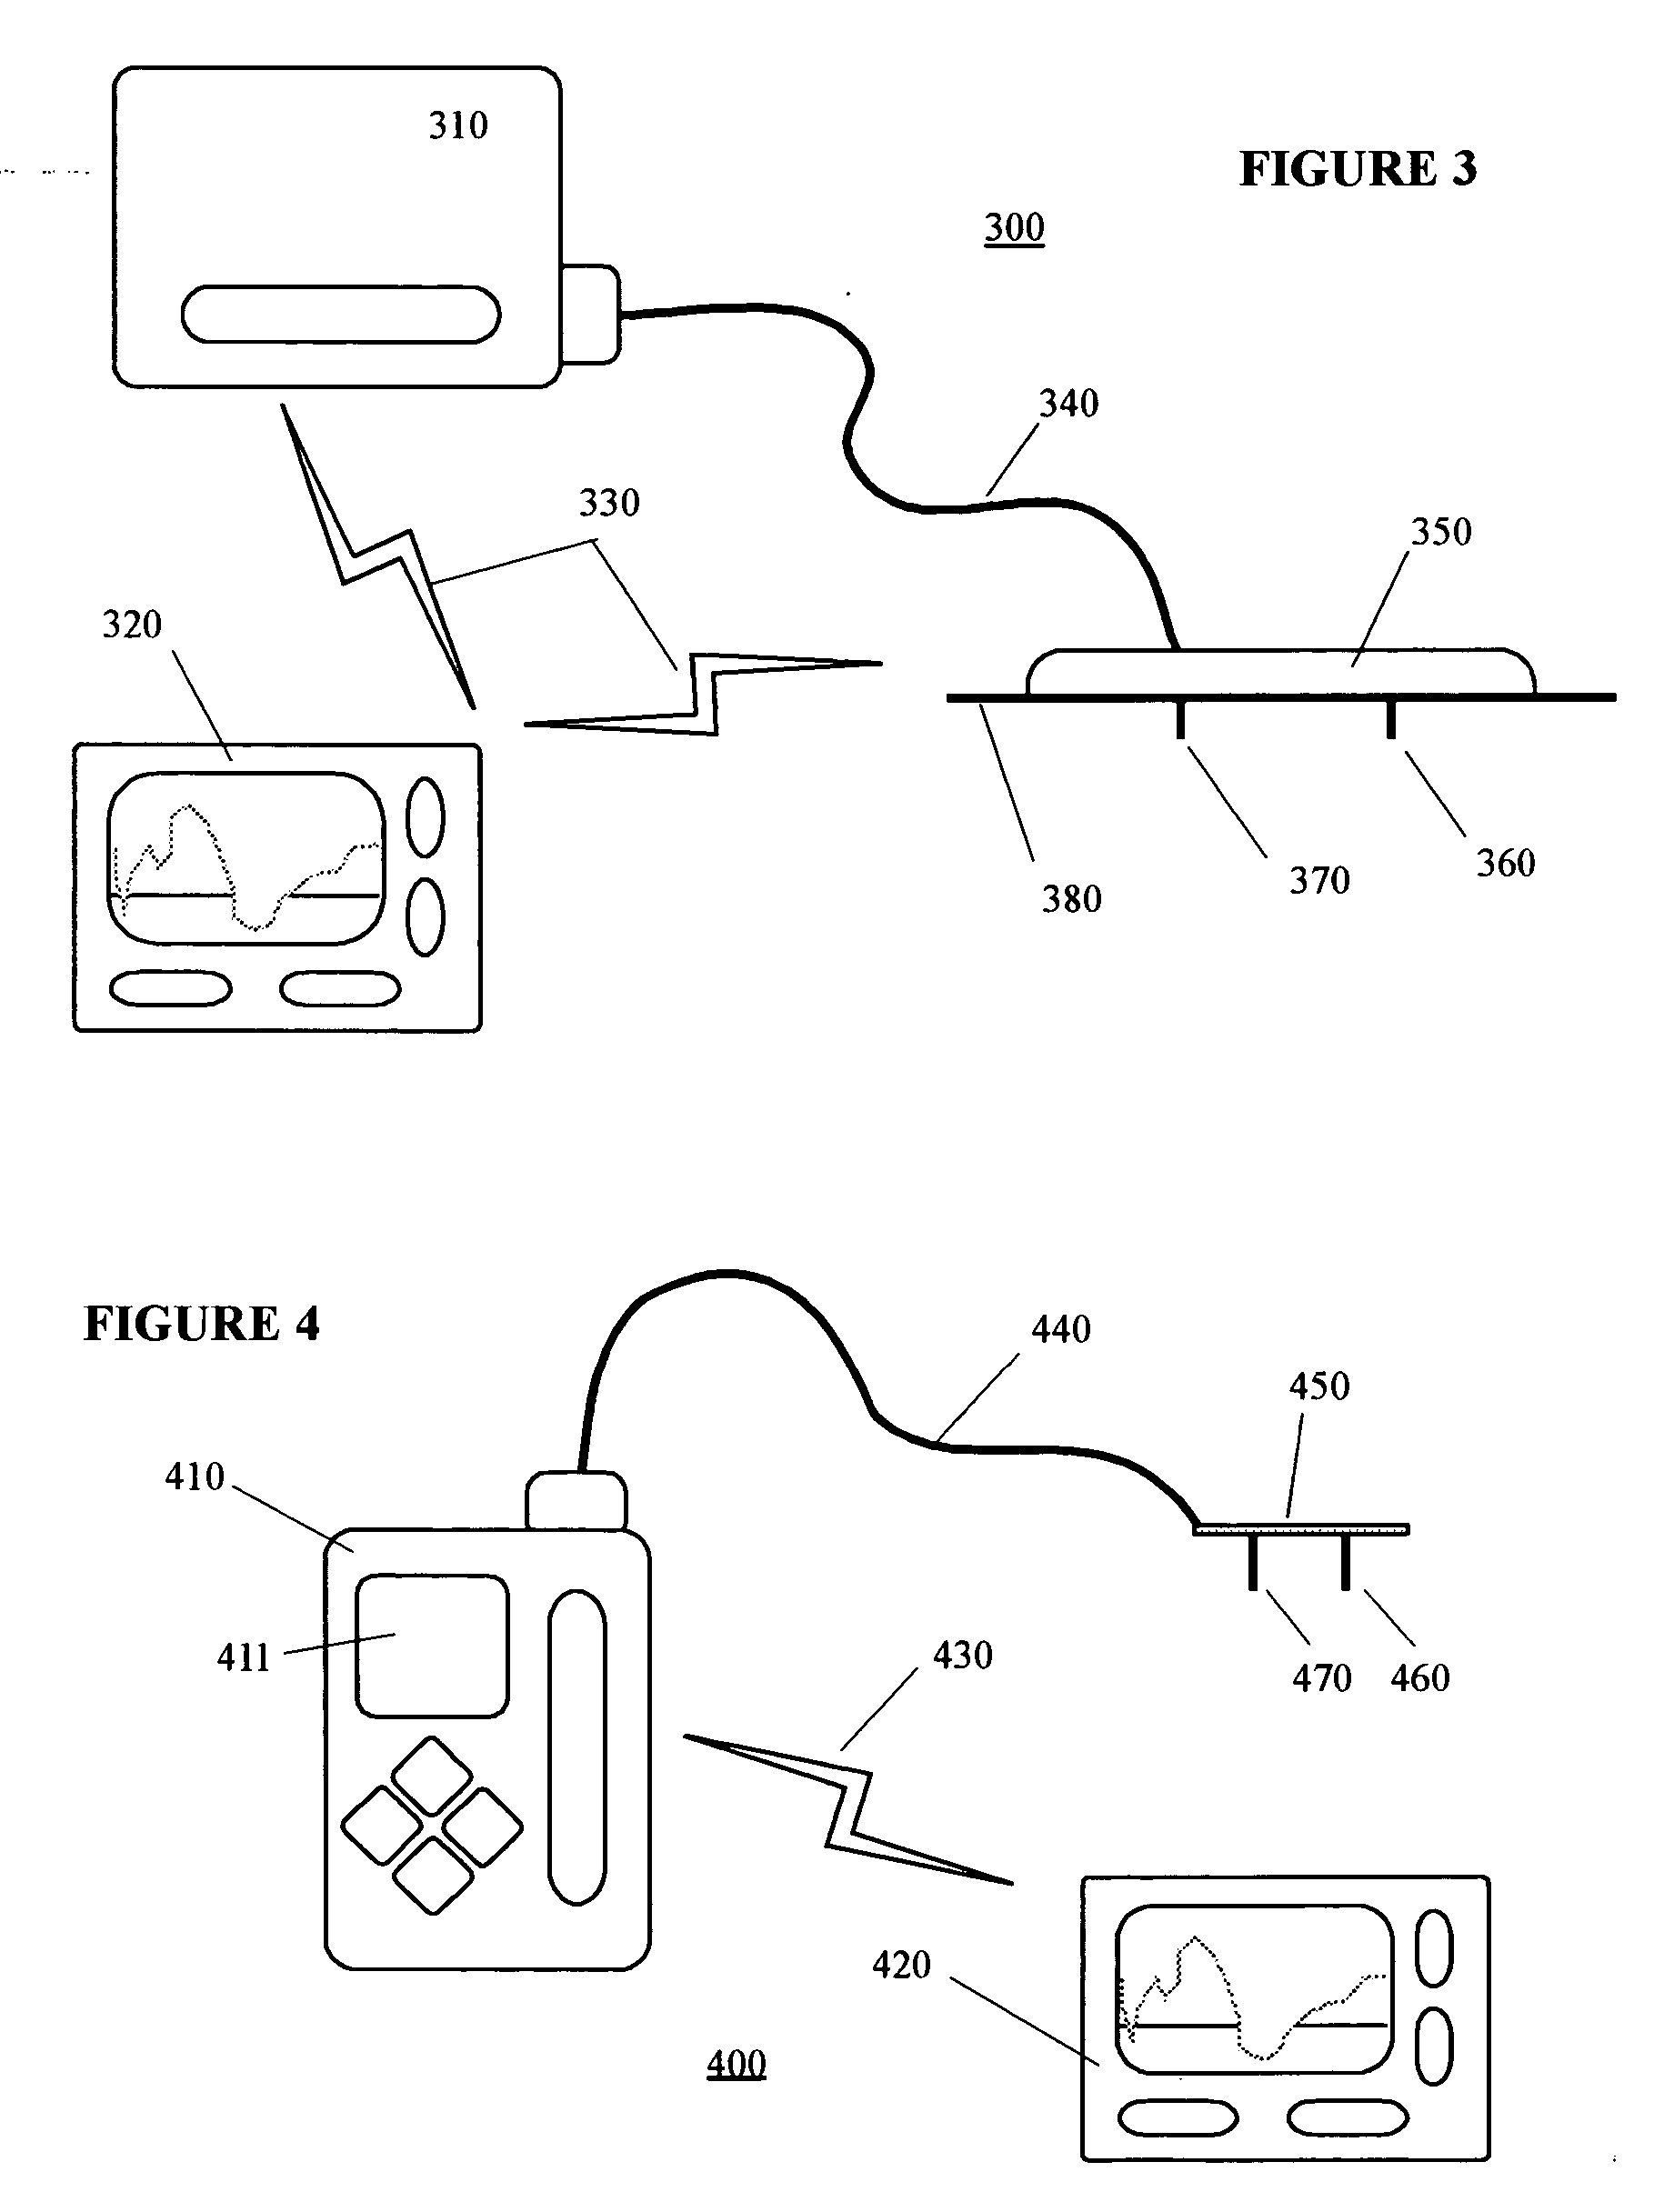 Method and system for providing integrated medication infusion and analyte monitoring system